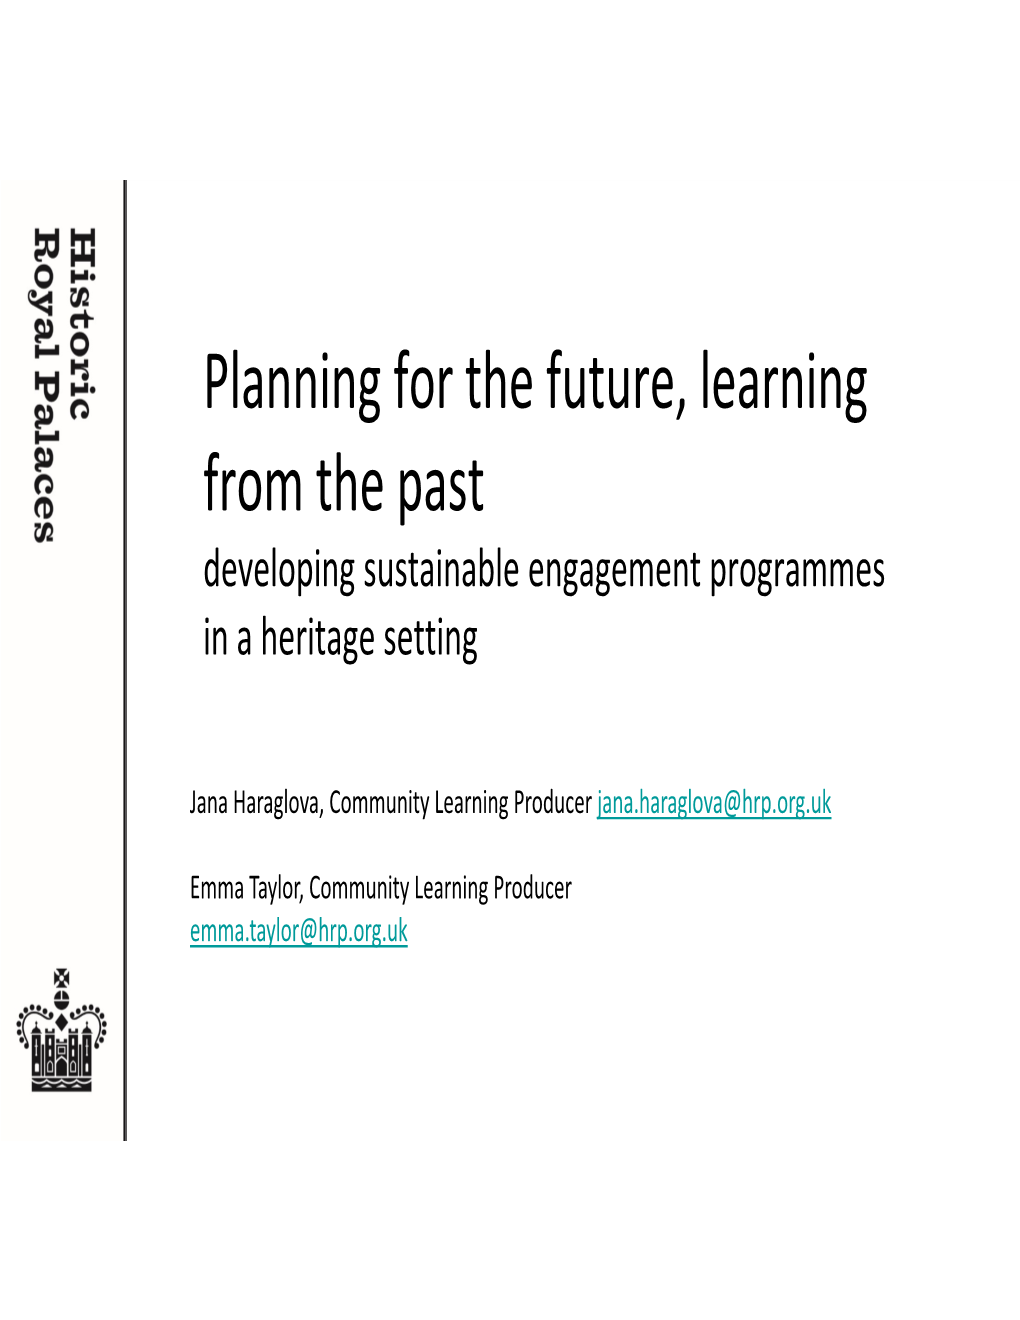 Planning for the Future, Learning from the Past Developing Sustainable Engagement Programmes in a Heritage Setting